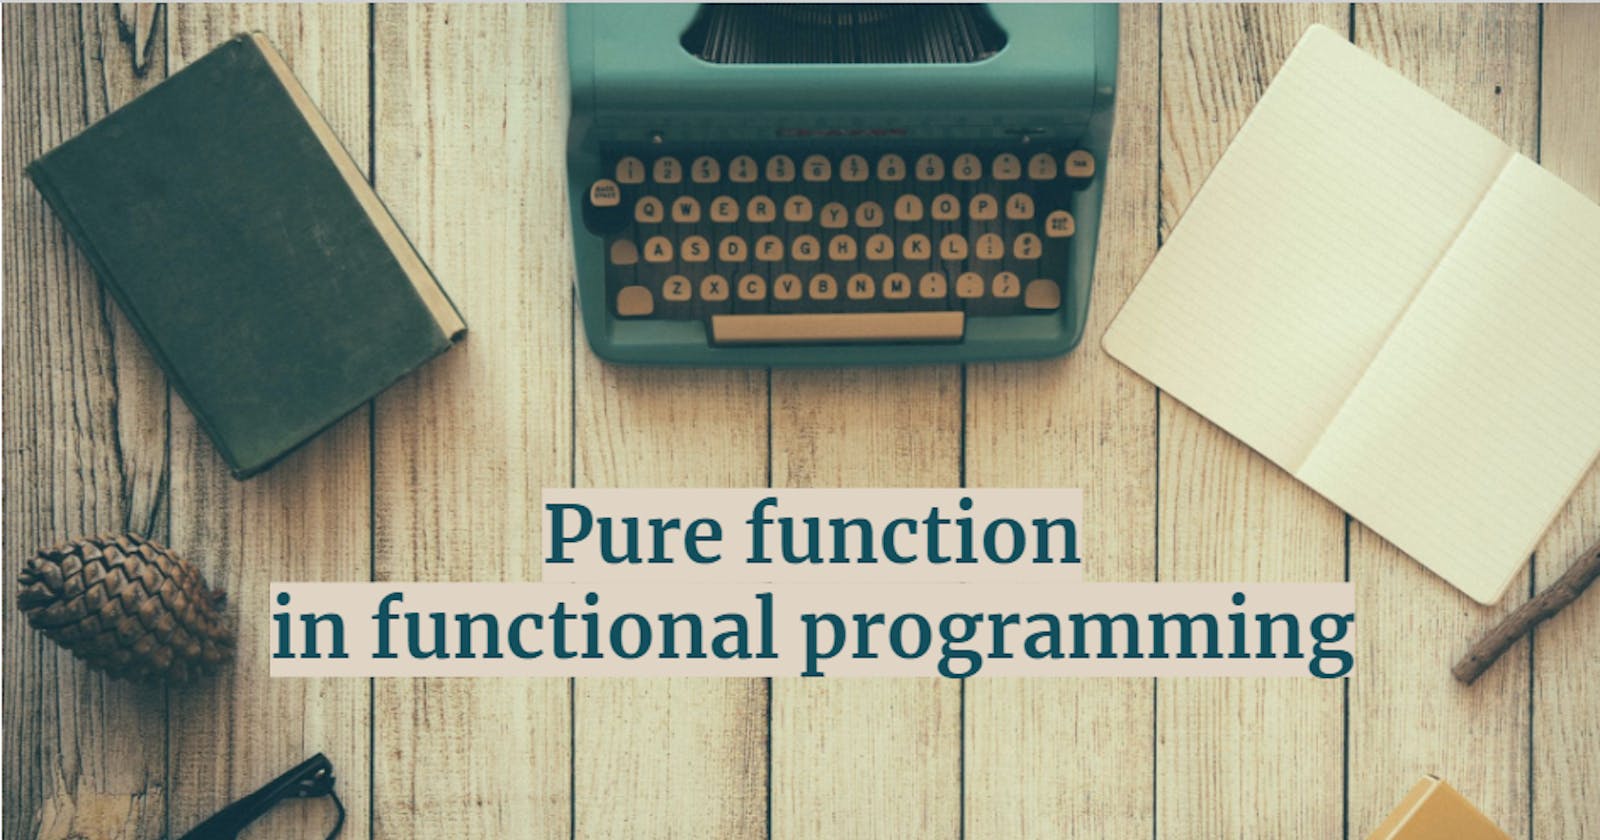 The core feature of functional programming: pure function